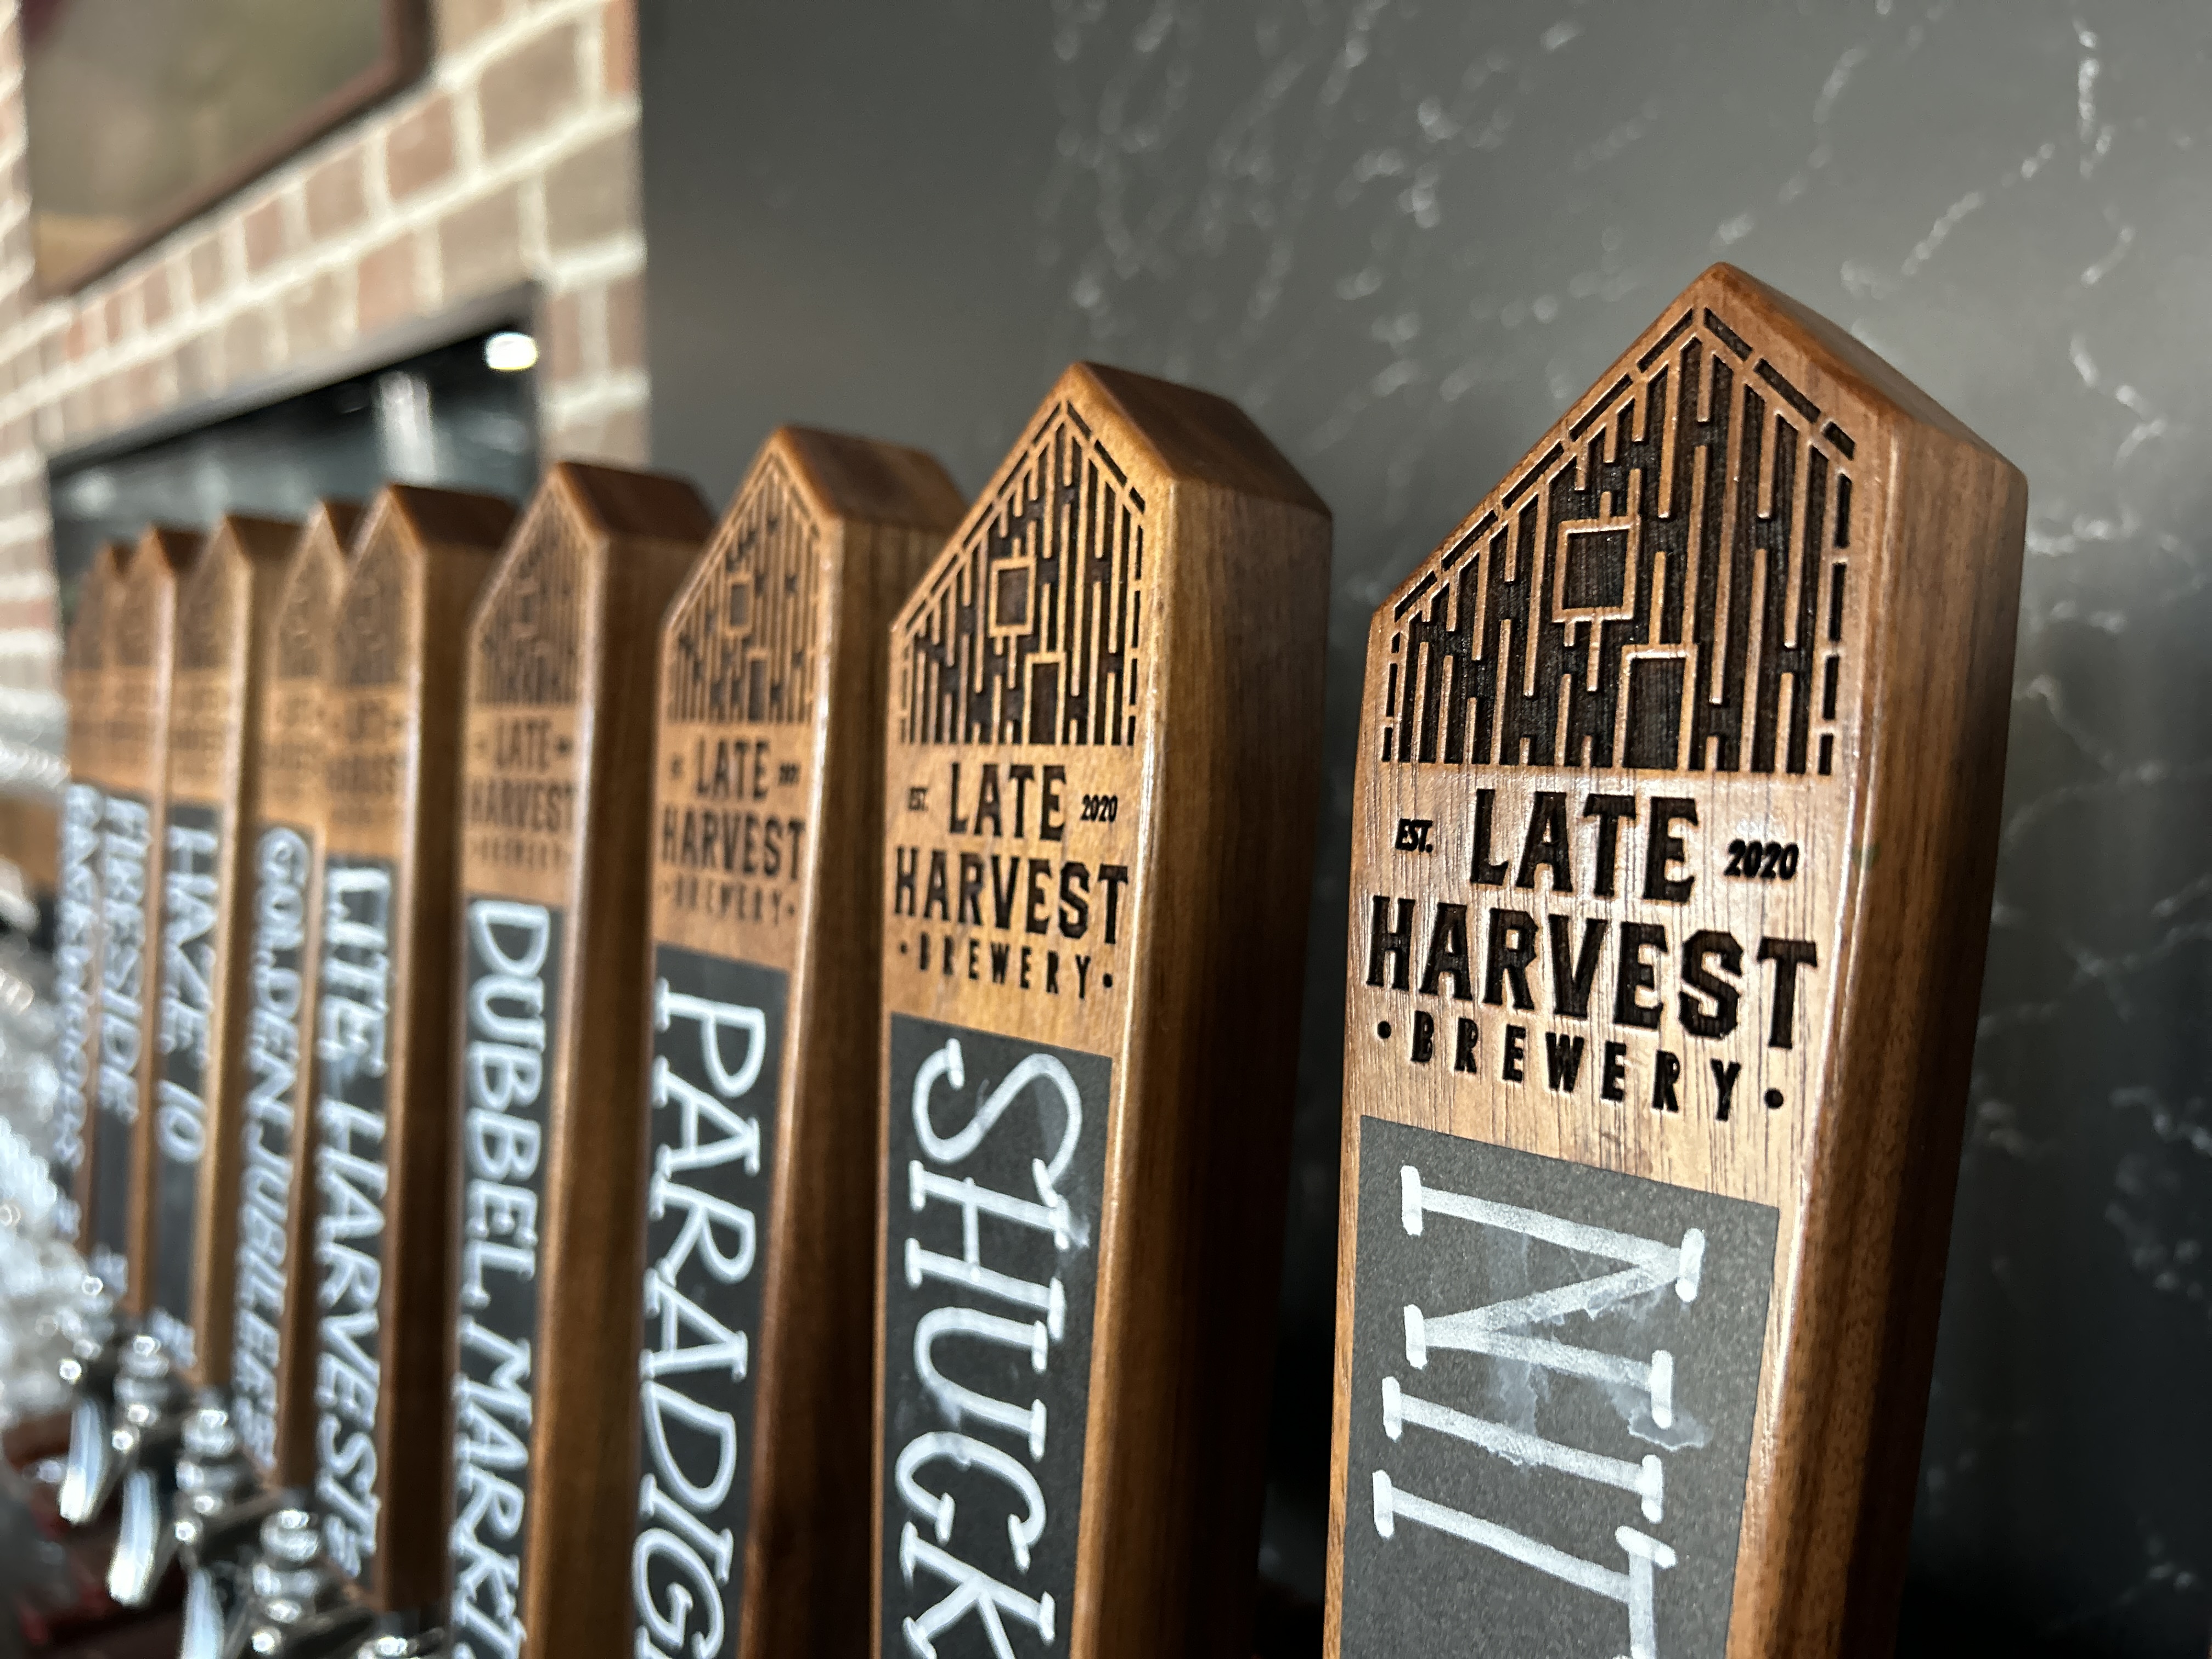 A line of tap handles show the brewery name Late Harvest Brewery carved into the wood.